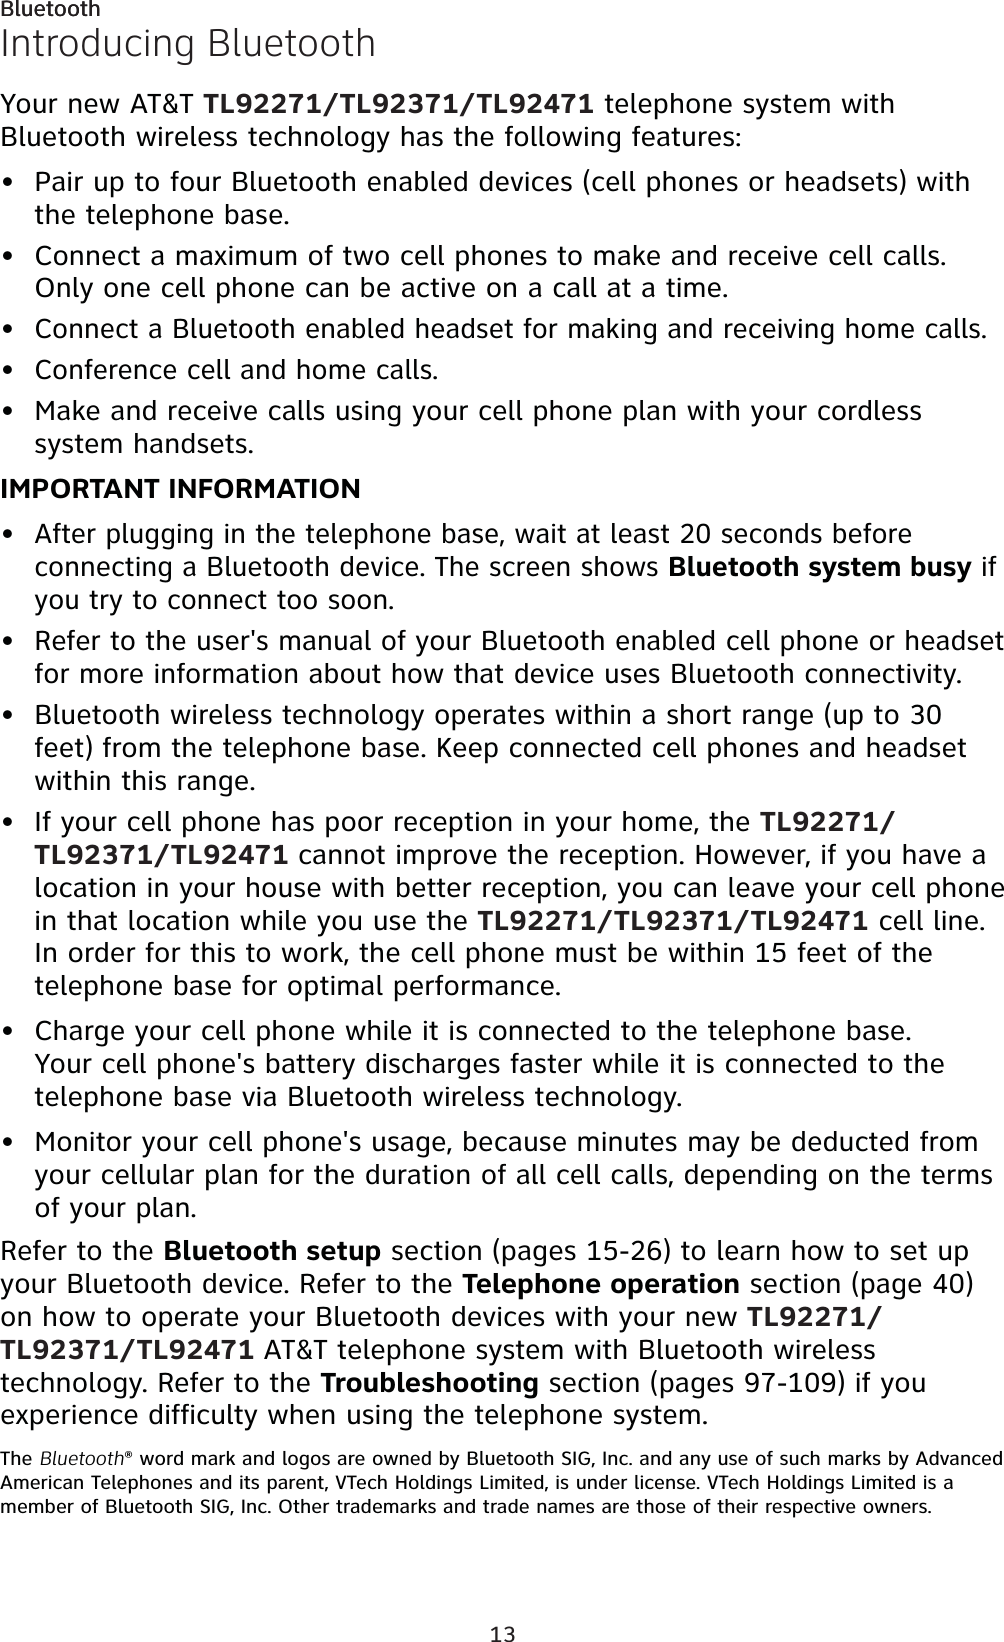 13BluetoothIntroducing BluetoothYour new AT&amp;T TL92271/TL92371/TL92471 telephone system with Bluetooth wireless technology has the following features:Pair up to four Bluetooth enabled devices (cell phones or headsets) with the telephone base.Connect a maximum of two cell phones to make and receive cell calls. Only one cell phone can be active on a call at a time.Connect a Bluetooth enabled headset for making and receiving home calls.Conference cell and home calls.Make and receive calls using your cell phone plan with your cordless system handsets. IMPORTANT INFORMATIONAfter plugging in the telephone base, wait at least 20 seconds before connecting a Bluetooth device. The screen shows Bluetooth system busy if you try to connect too soon.Refer to the user&apos;s manual of your Bluetooth enabled cell phone or headset for more information about how that device uses Bluetooth connectivity.Bluetooth wireless technology operates within a short range (up to 30 feet) from the telephone base. Keep connected cell phones and headset within this range.If your cell phone has poor reception in your home, the TL92271/TL92371/TL92471 cannot improve the reception. However, if you have a location in your house with better reception, you can leave your cell phone in that location while you use the TL92271/TL92371/TL92471 cell line. In order for this to work, the cell phone must be within 15 feet of the telephone base for optimal performance.Charge your cell phone while it is connected to the telephone base. Your cell phone&apos;s battery discharges faster while it is connected to the telephone base via Bluetooth wireless technology.Monitor your cell phone&apos;s usage, because minutes may be deducted from your cellular plan for the duration of all cell calls, depending on the terms of your plan.Refer to the Bluetooth setup section (pages 15-26) to learn how to set up your Bluetooth device. Refer to the Telephone operation section (page 40)on how to operate your Bluetooth devices with your new TL92271/TL92371/TL92471 AT&amp;T telephone system with Bluetooth wireless technology. Refer to the Troubleshooting section (pages 97-109) if you experience difficulty when using the telephone system.The Bluetooth® word mark and logos are owned by Bluetooth SIG, Inc. and any use of such marks by Advanced American Telephones and its parent, VTech Holdings Limited, is under license. VTech Holdings Limited is a member of Bluetooth SIG, Inc. Other trademarks and trade names are those of their respective owners.•••••••••••Bluetooth